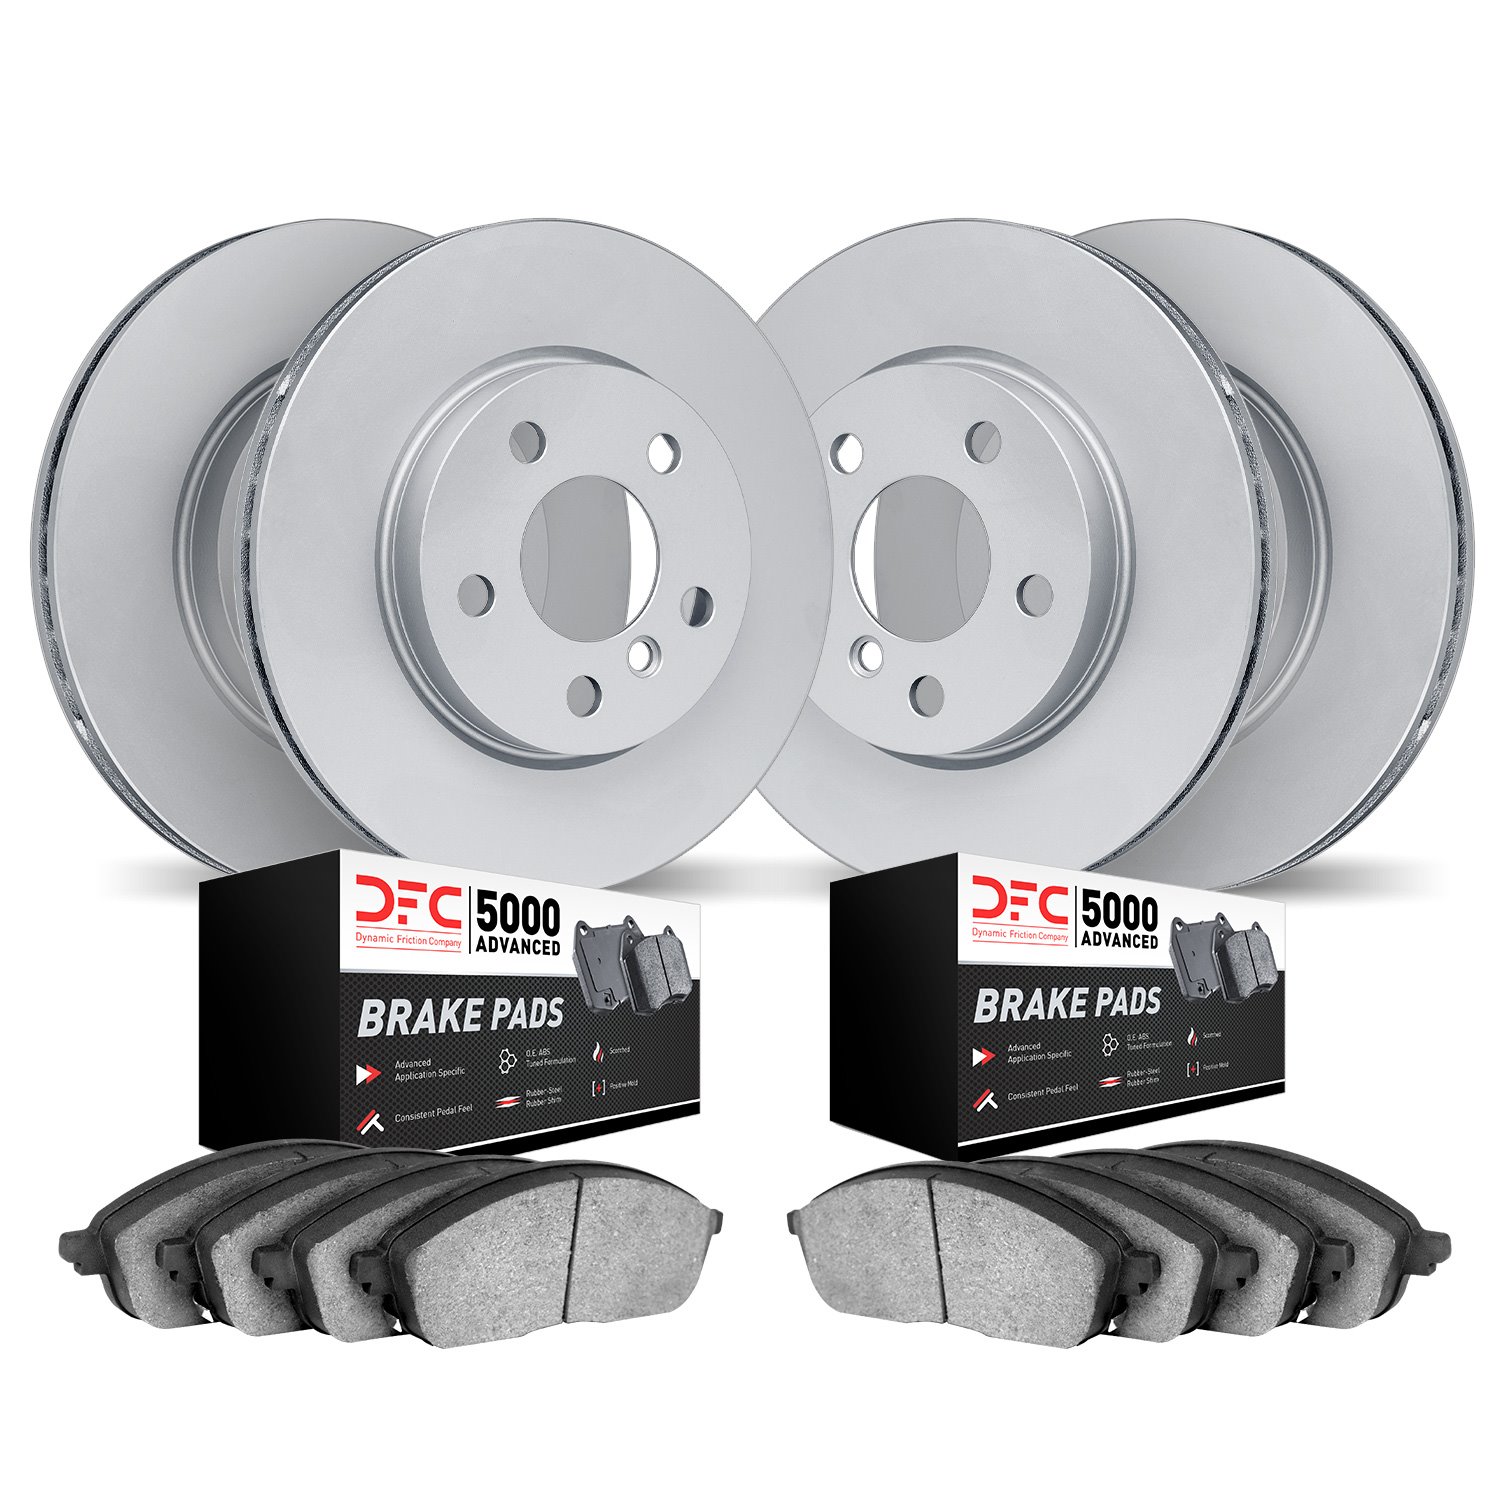 9504-73055 GEOMET Brake Rotors w/5000 Advanced Brake Pads Kit, Fits Select Audi/Volkswagen, Position: Front and Rear